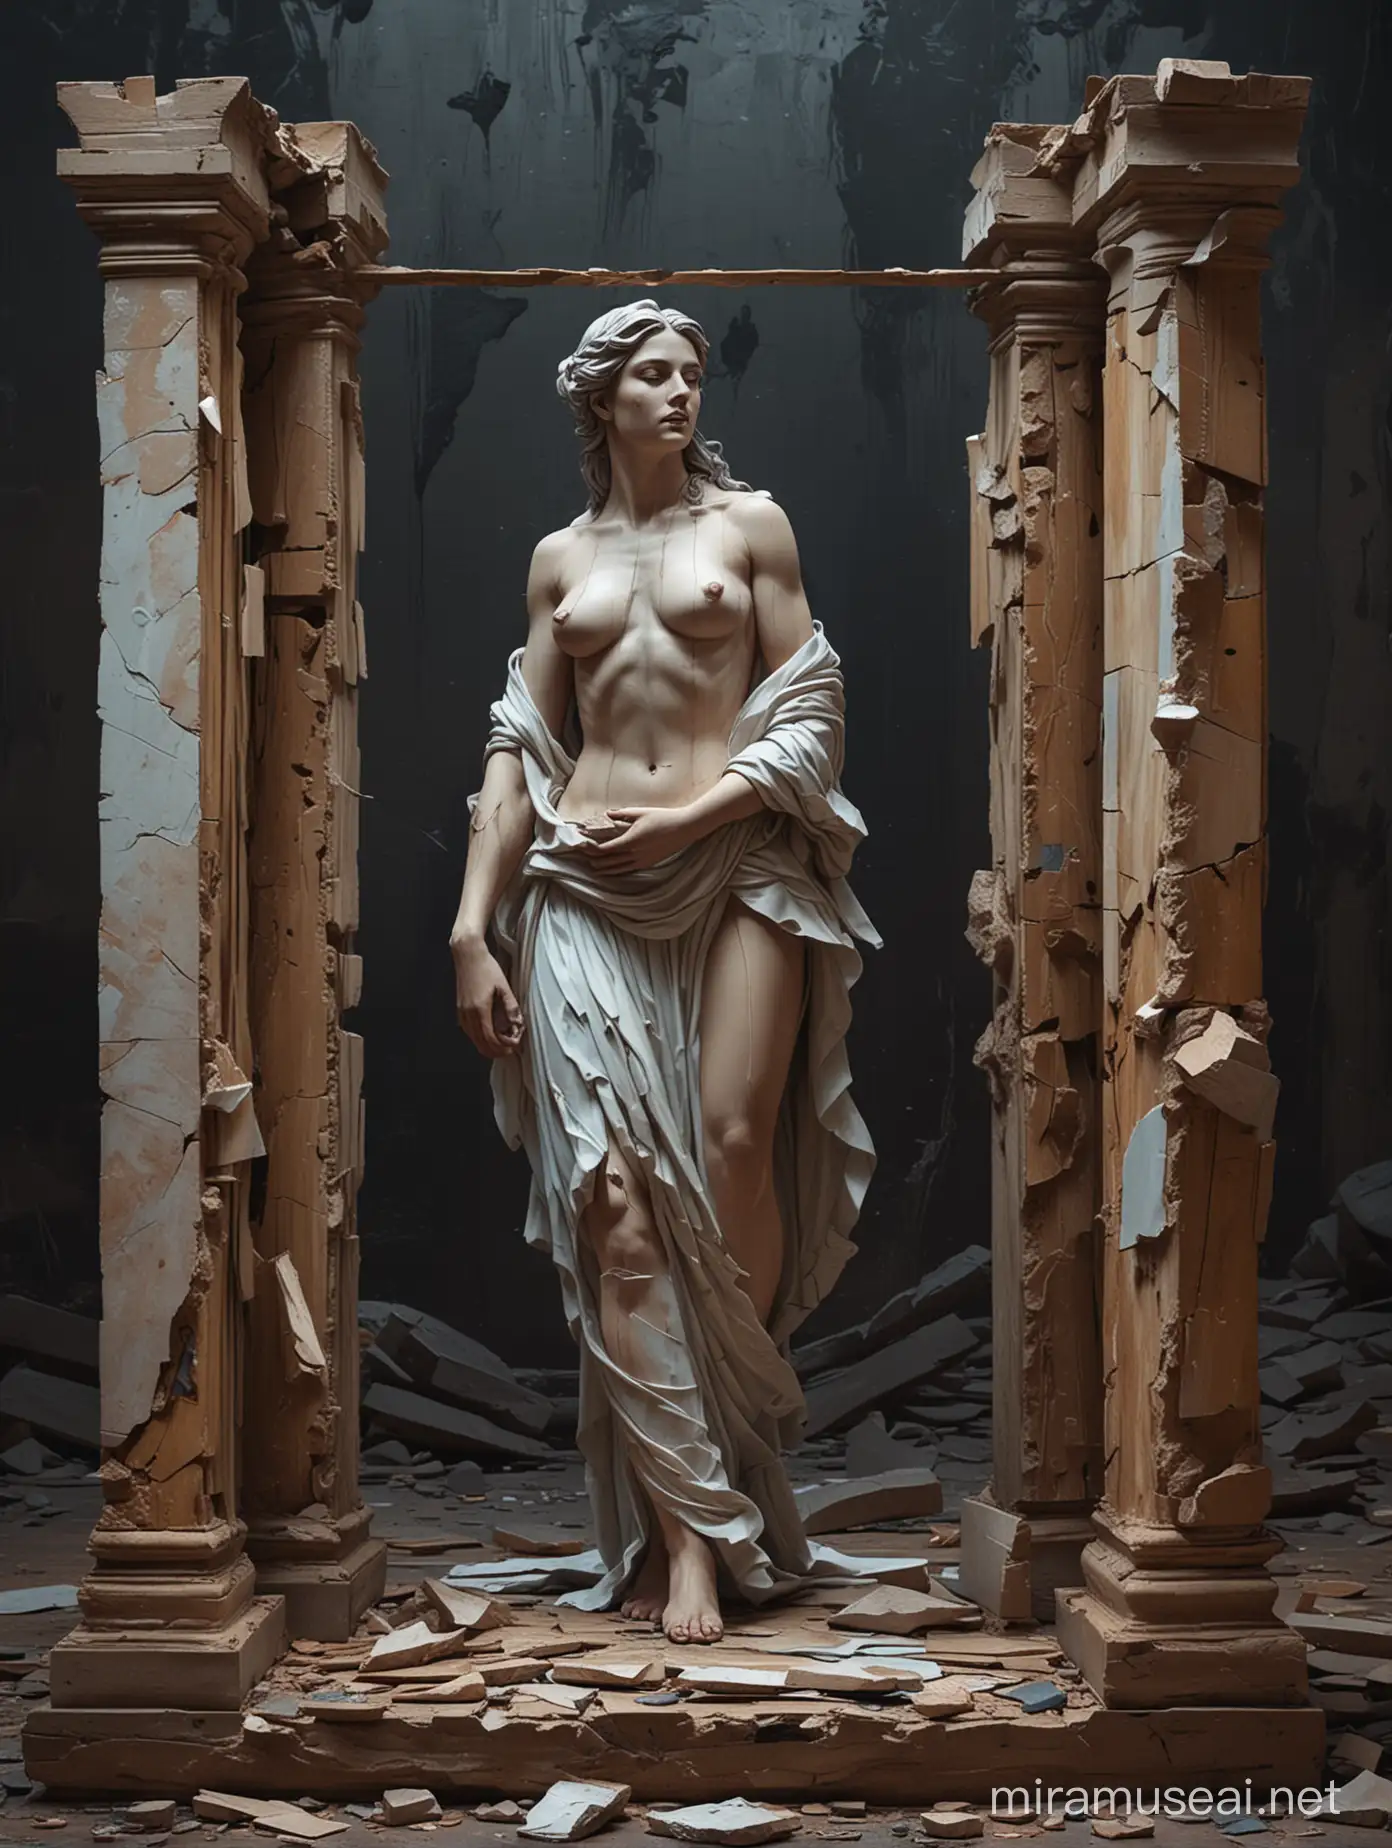 beautiful real Woman  with Broken Marble statue of man , emulating a realistic, and three Wooden pieces bars and torn cardboard with gap moving in different shapes. In abstract landscape. Amazing details. Dark side, neon colors, Oil Painting, Baroque Style